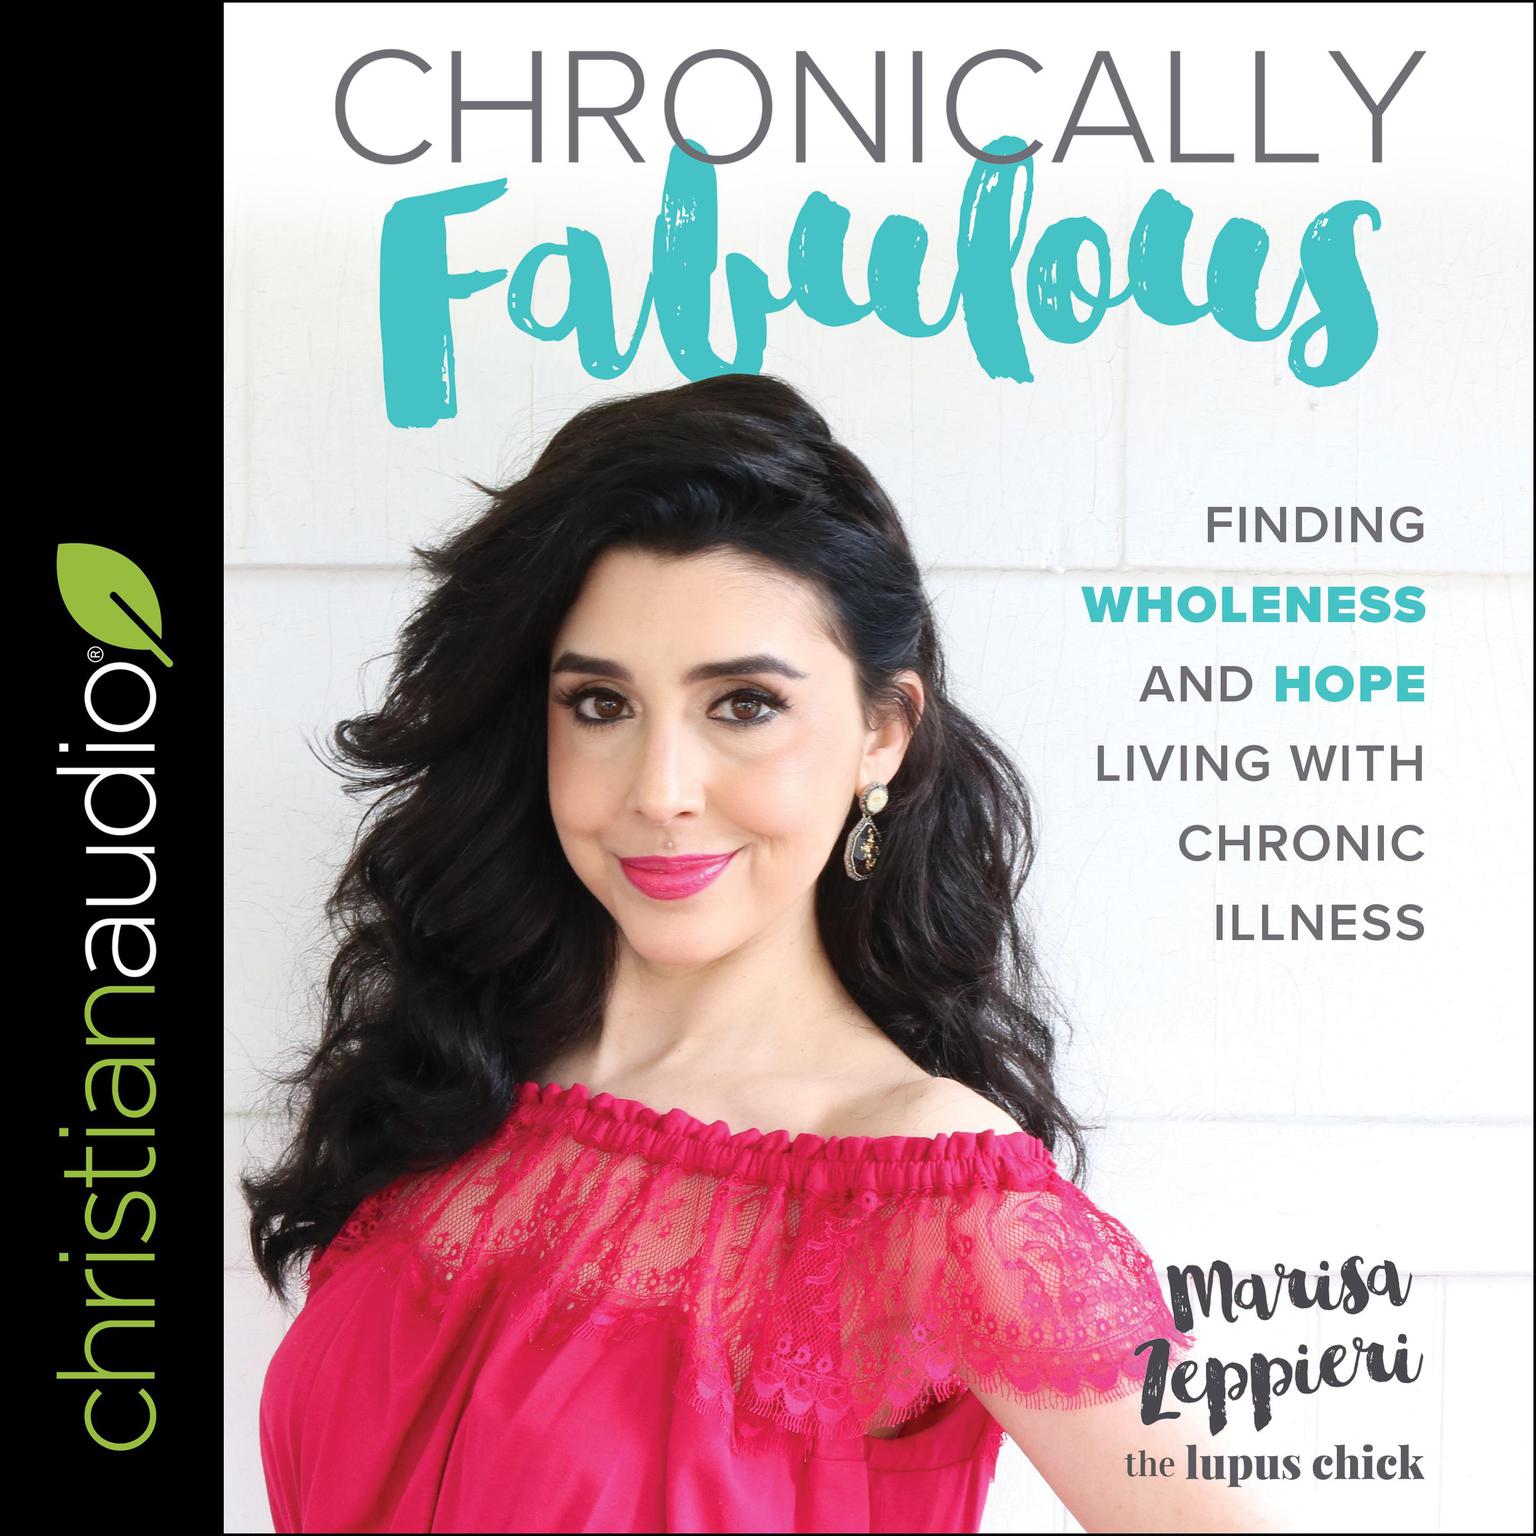 Chronically Fabulous: Finding Wholeness and Hope Living with Chronic Illness Audiobook, by Marisa Zeppieri